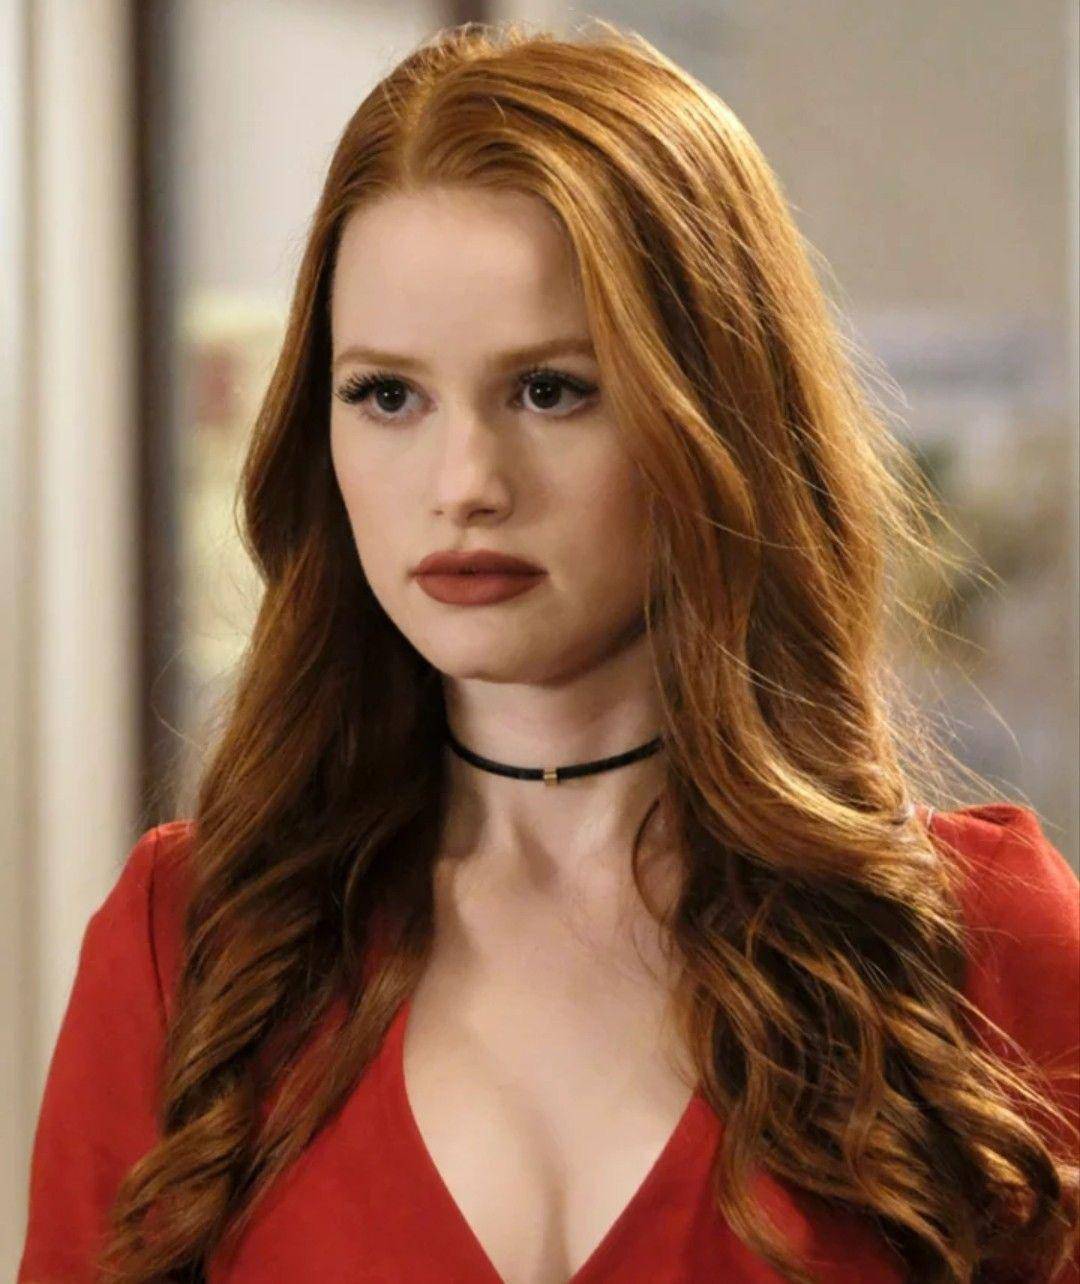 Madelaine Petsch Makes Me So Hard Can Someone Make Me Cum For Her